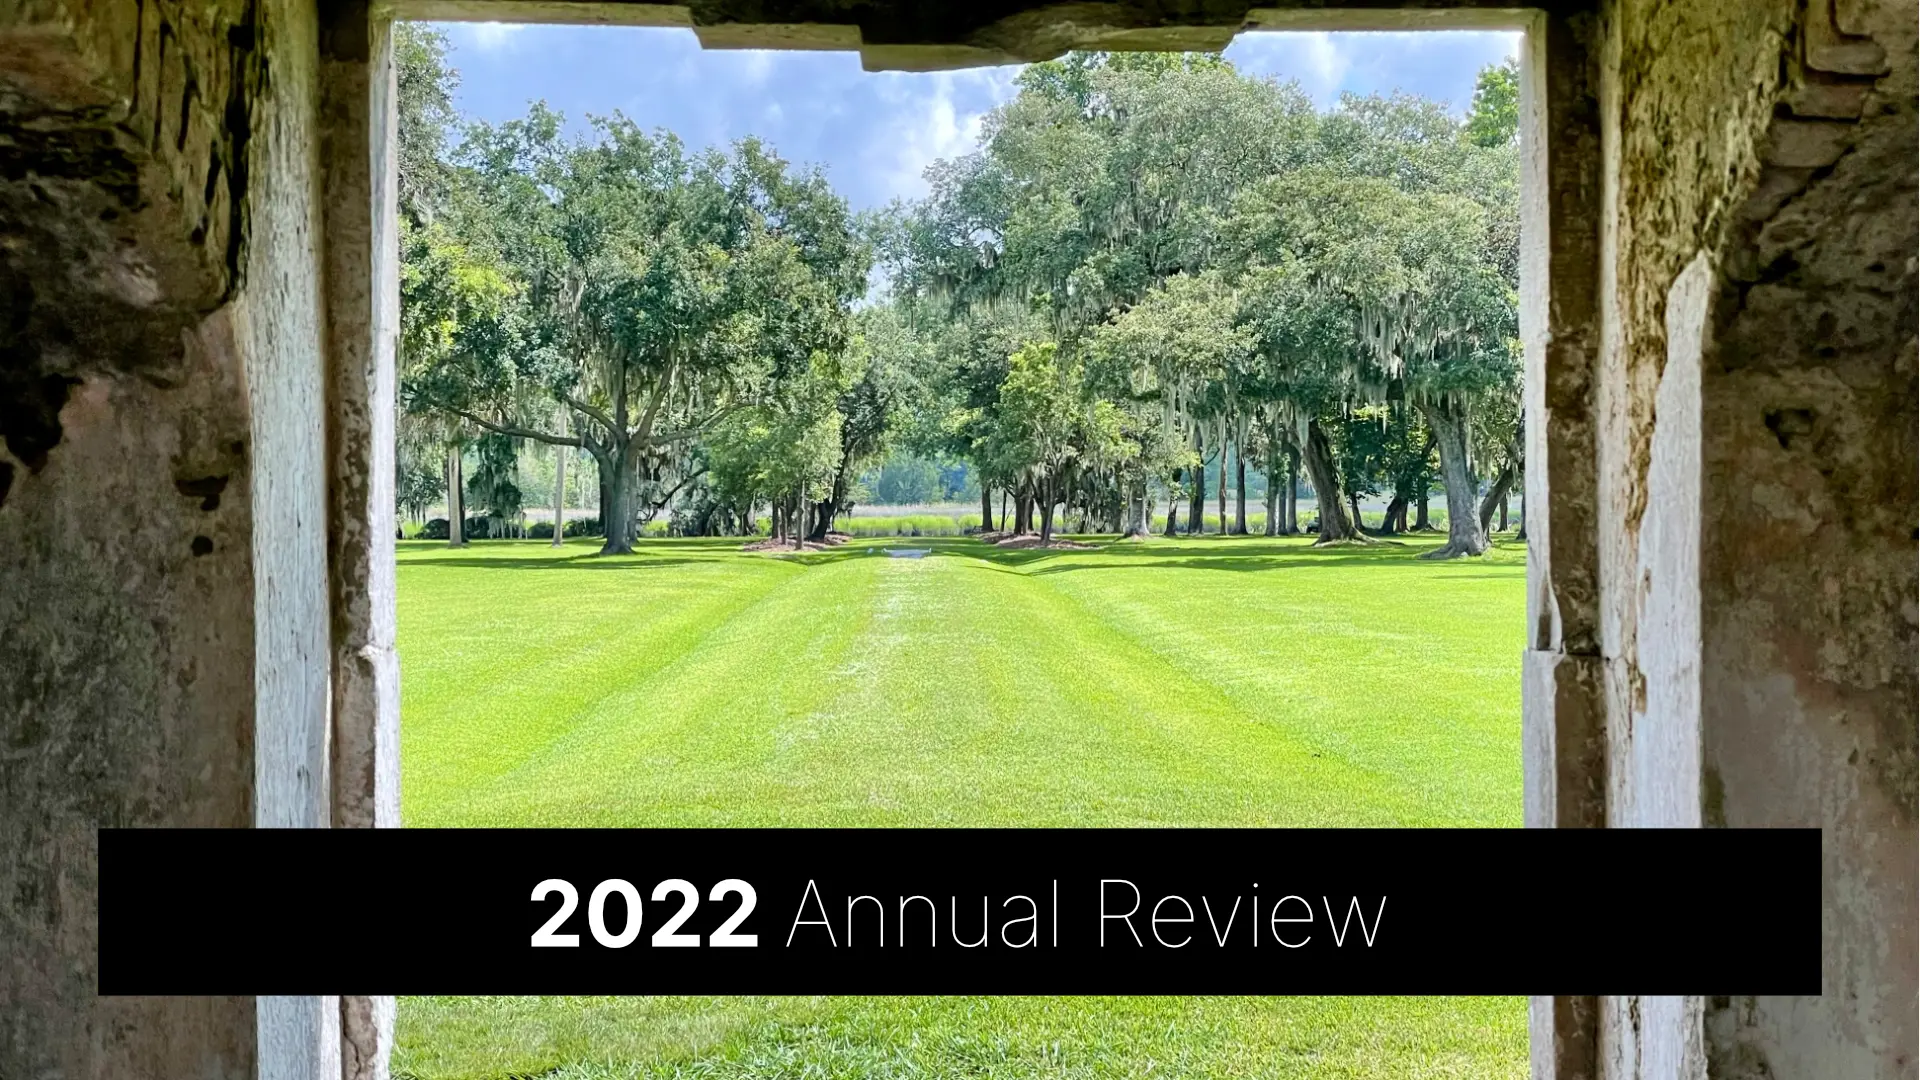 My 2022 Annual Review Cover